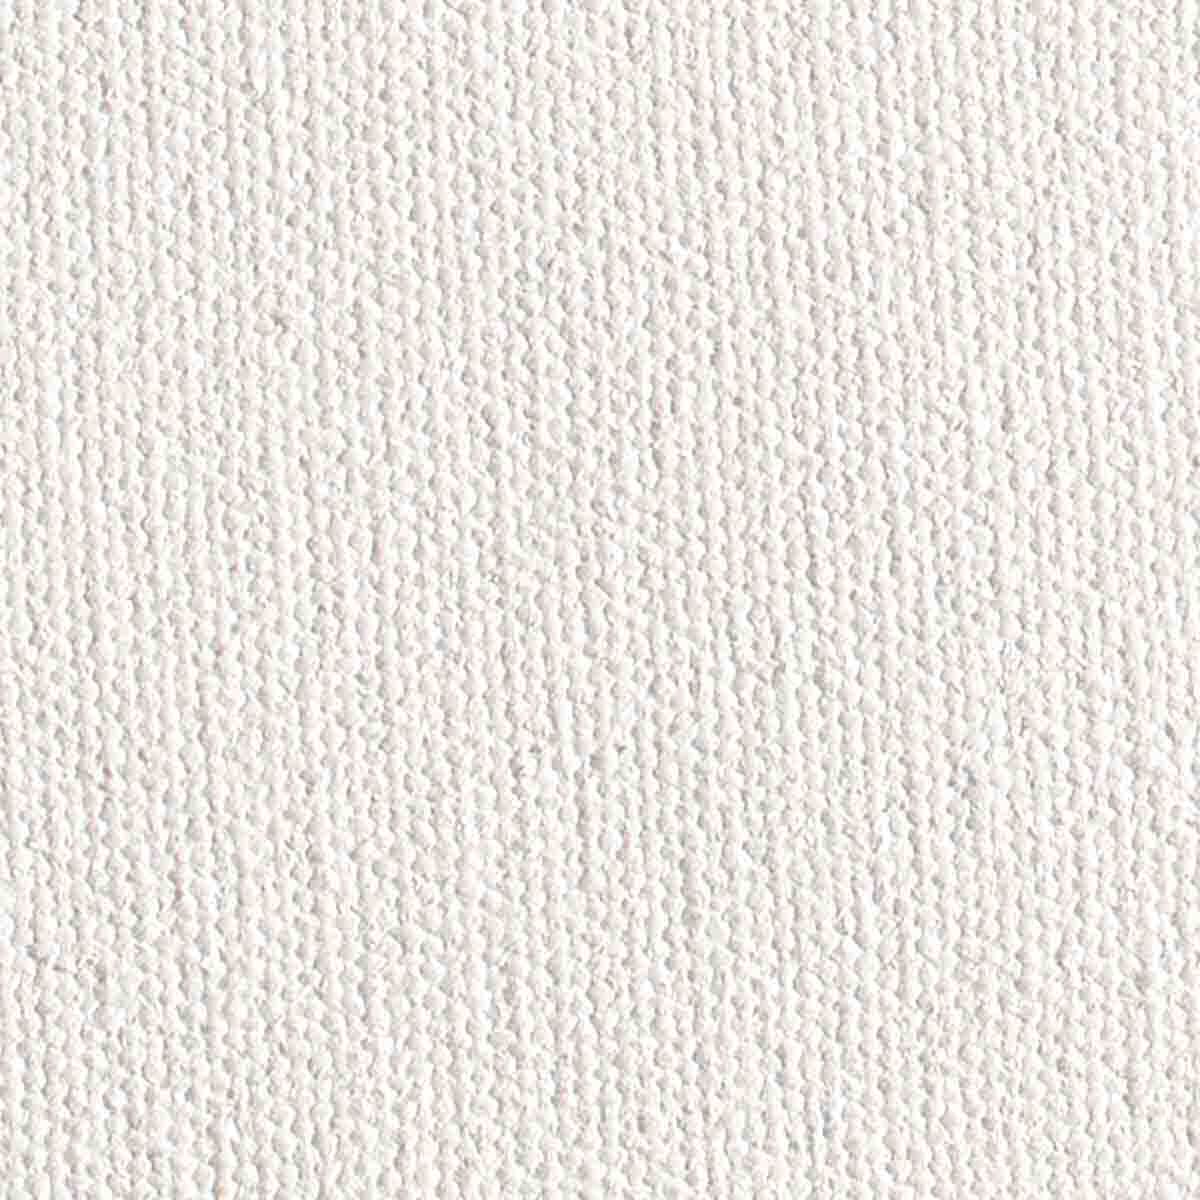 12oz Weight (14.5oz primed) - The finest filled cotton duck on the market - Double primed